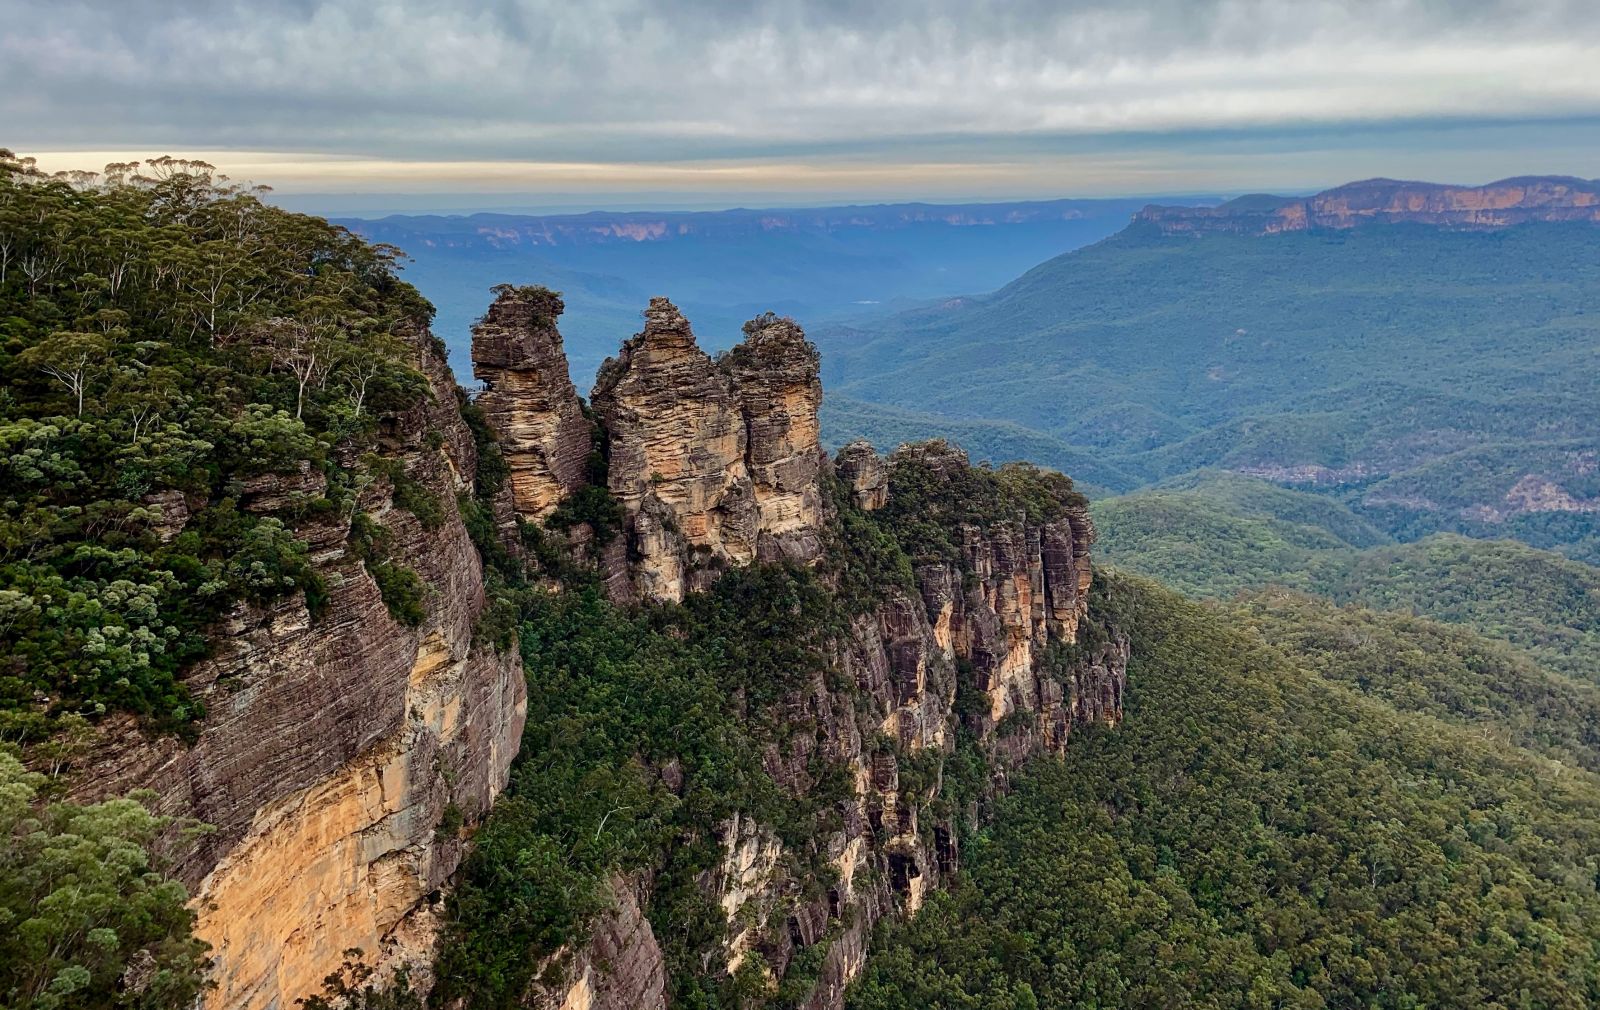 The peaks of the Three Sisters in the Blue Mountains near Sydney Australia